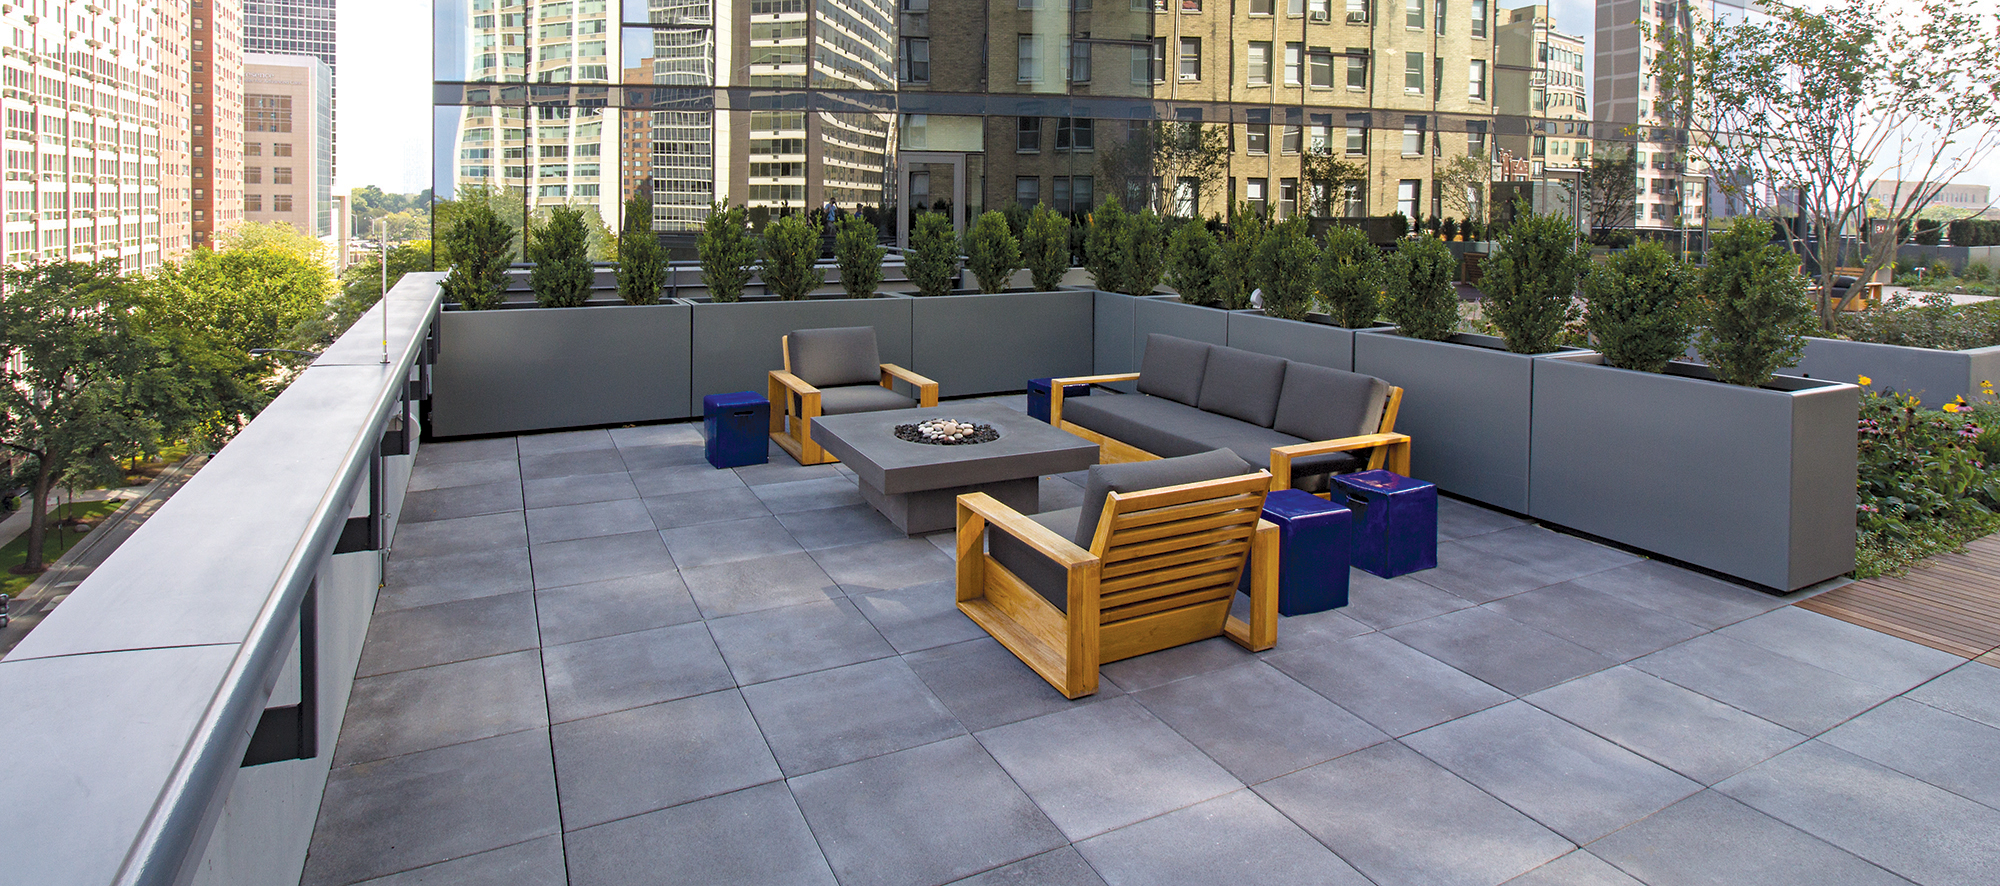 A roof deck on a glass building reflecting the Chicago skyline is paved with Unilock Umbriano slabs in Midnight Sky.